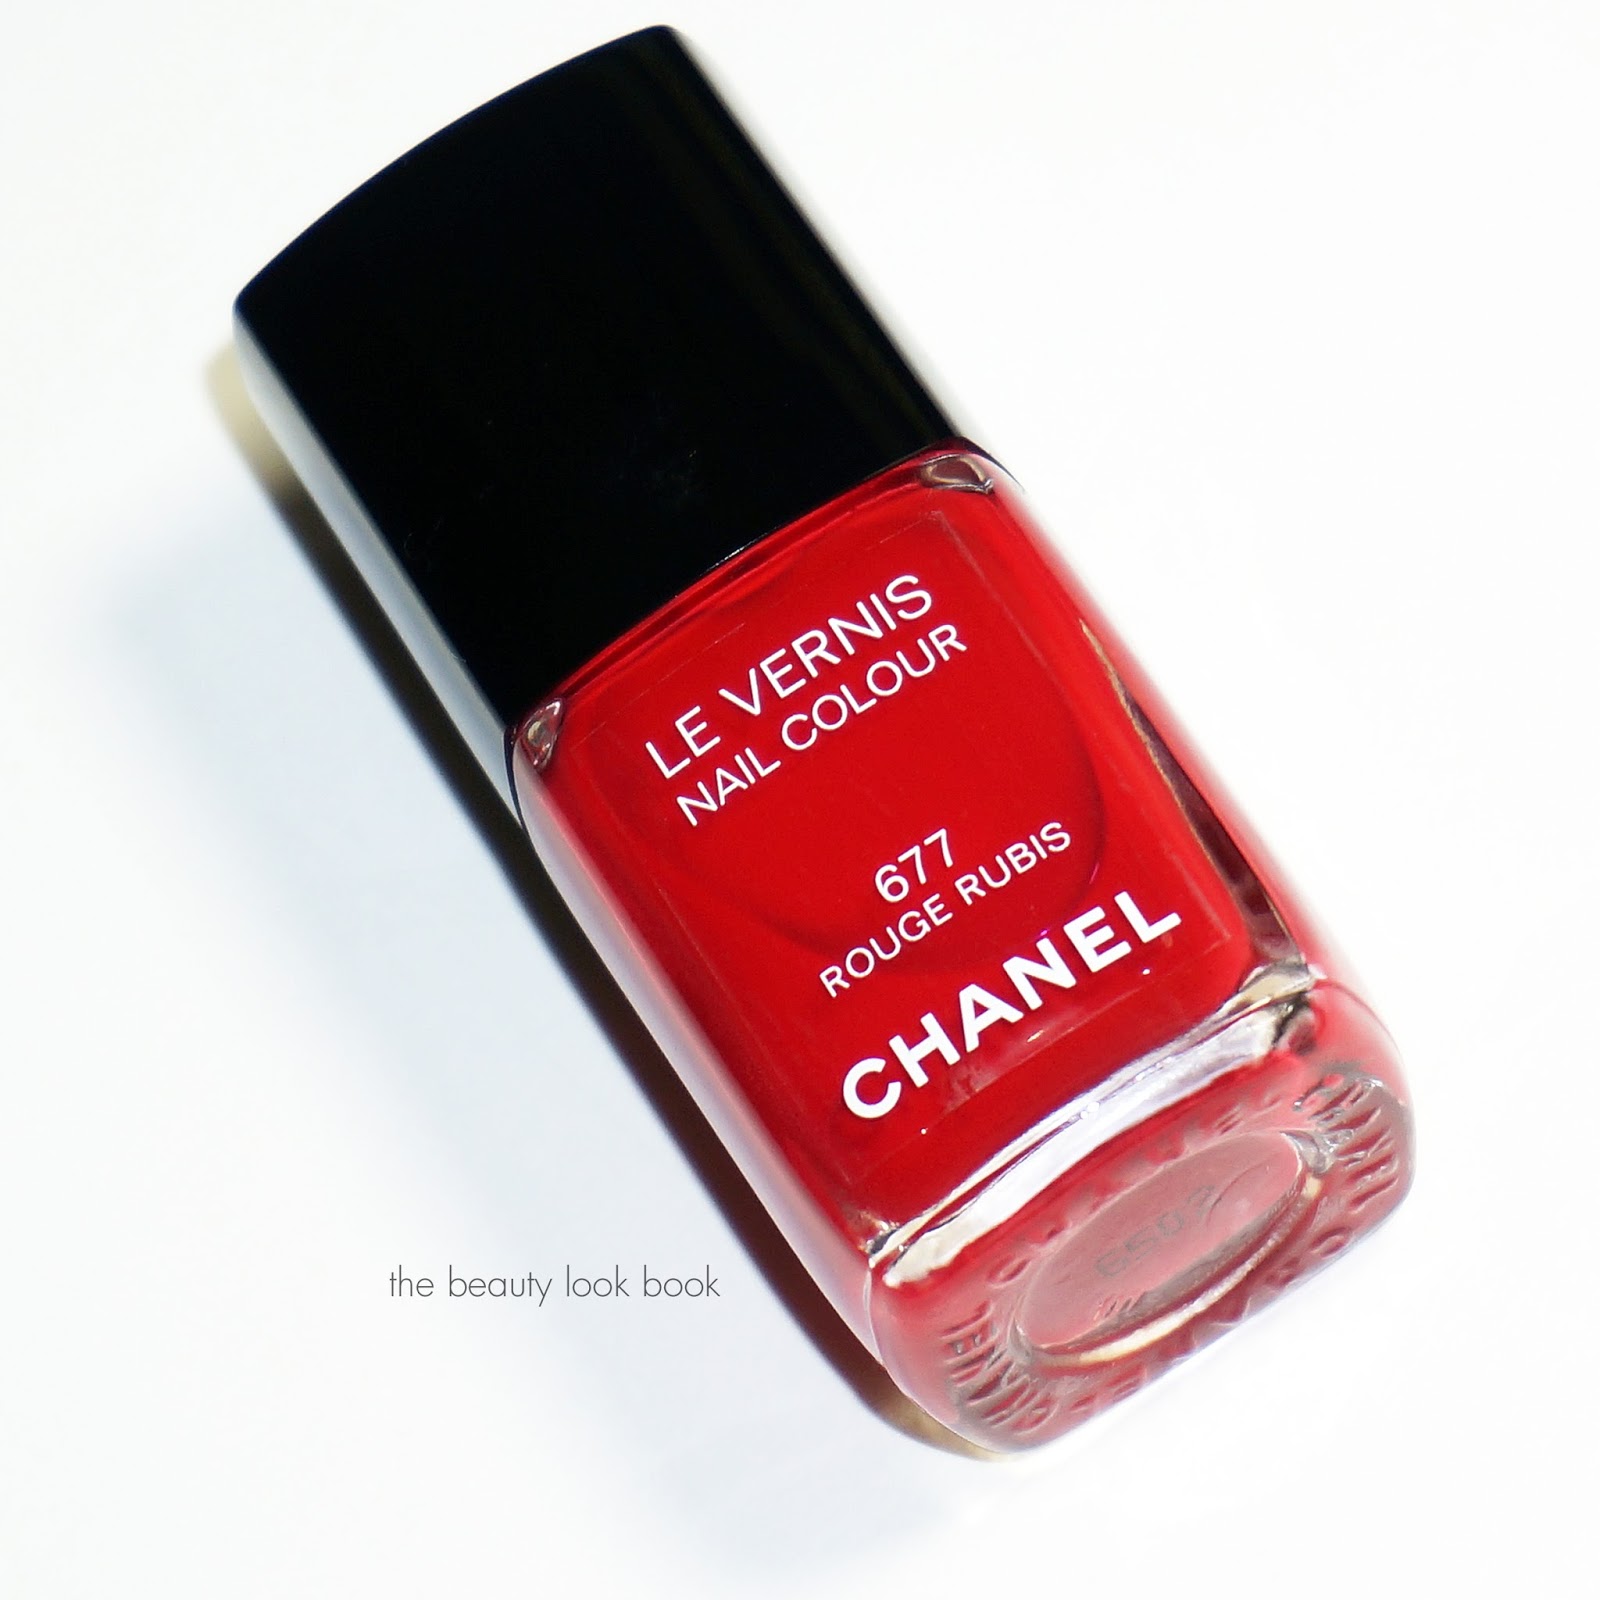 Chanel Fall 2016 Le Rouge N°1 Collection, Le Vernis Nail Polishes: Review  and Swatches